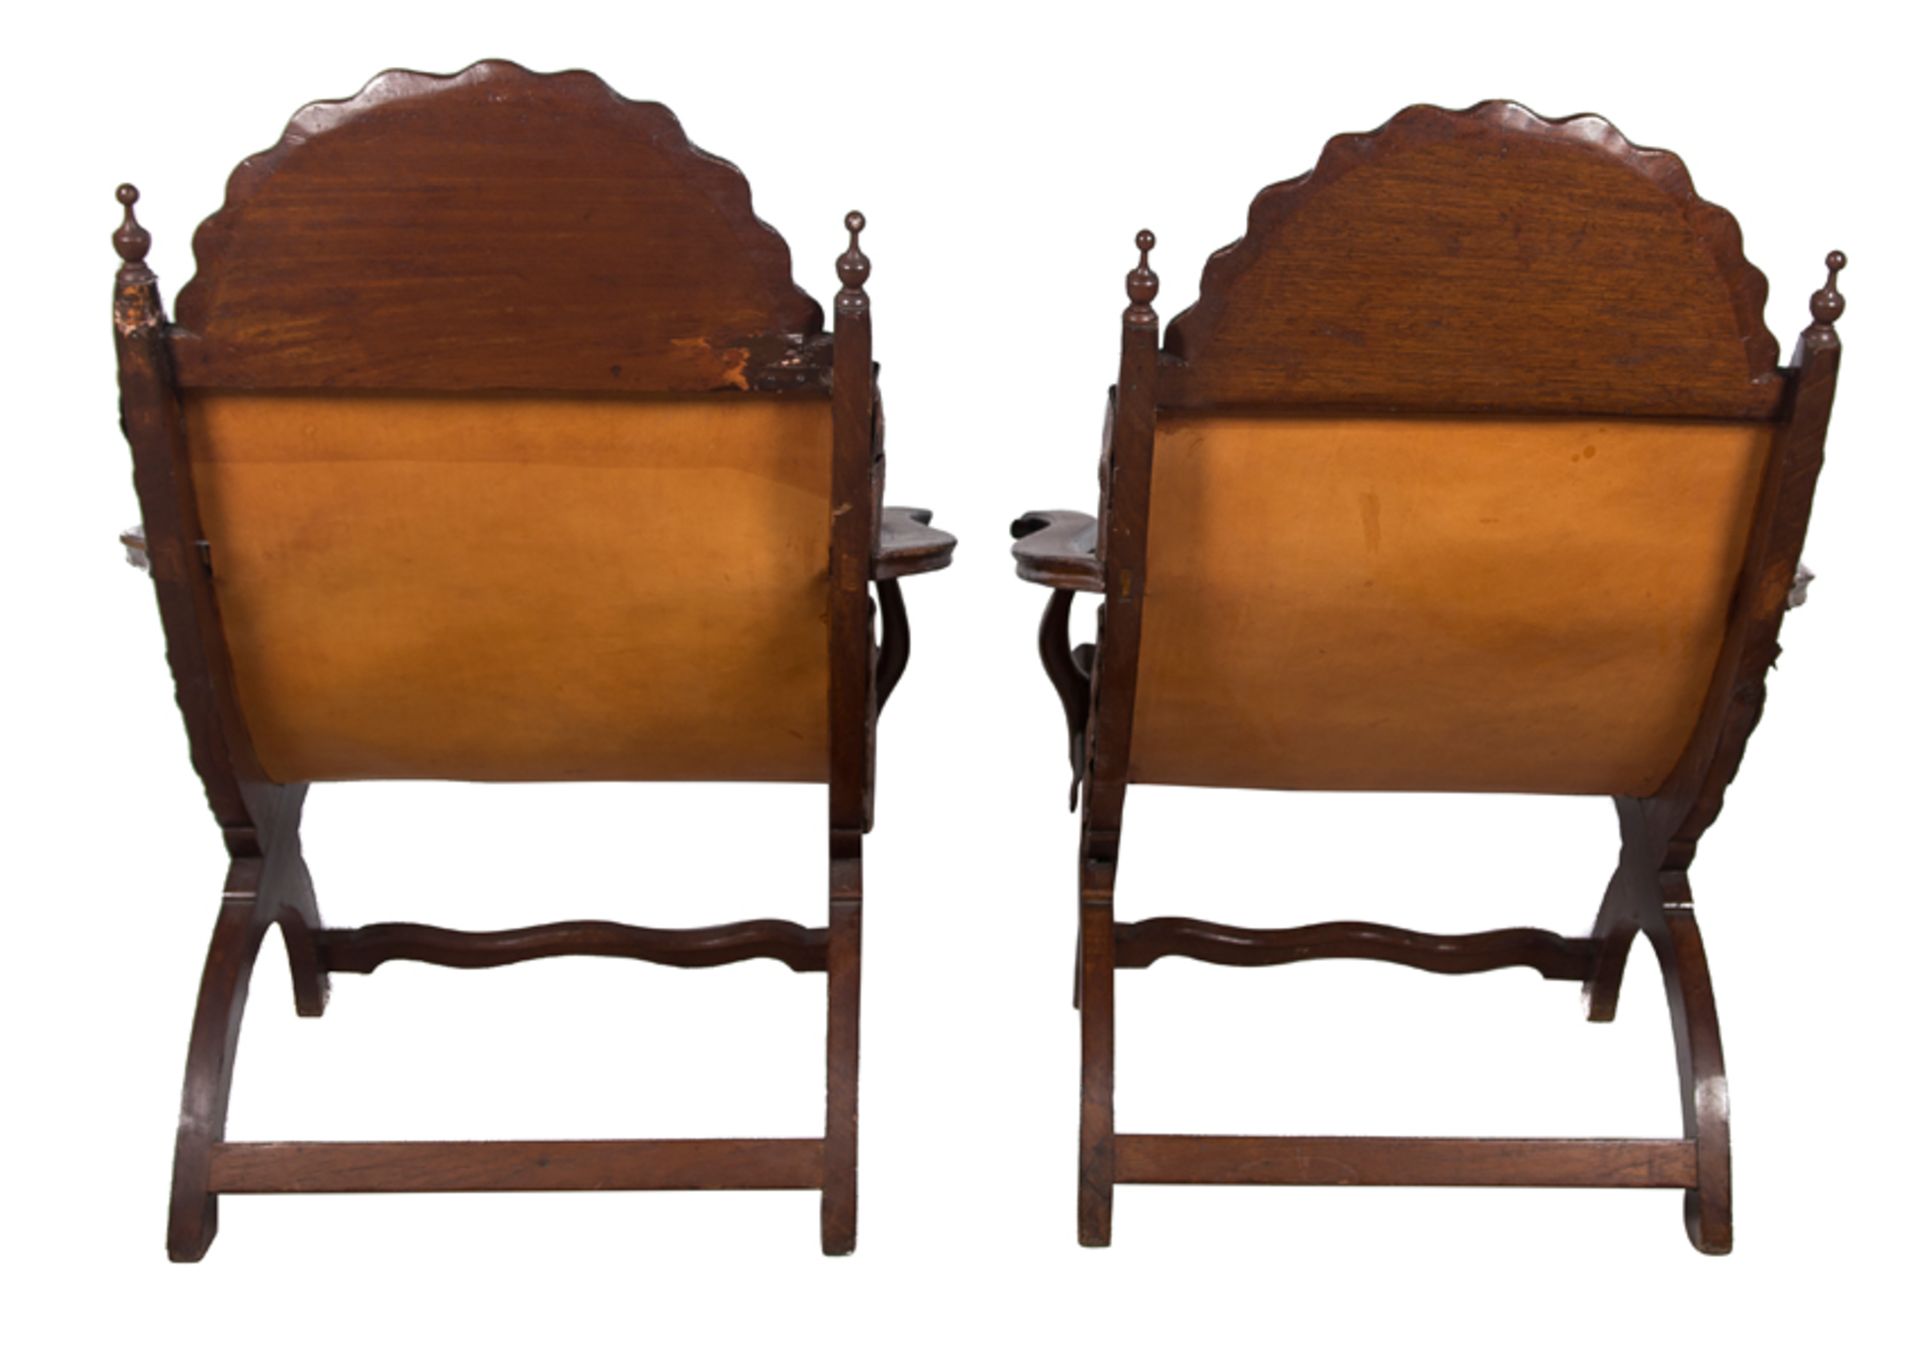 Pair of "Campeche" chairs. Made of cedar wood and leather. Mexico. Late 18th century. - Image 7 of 7